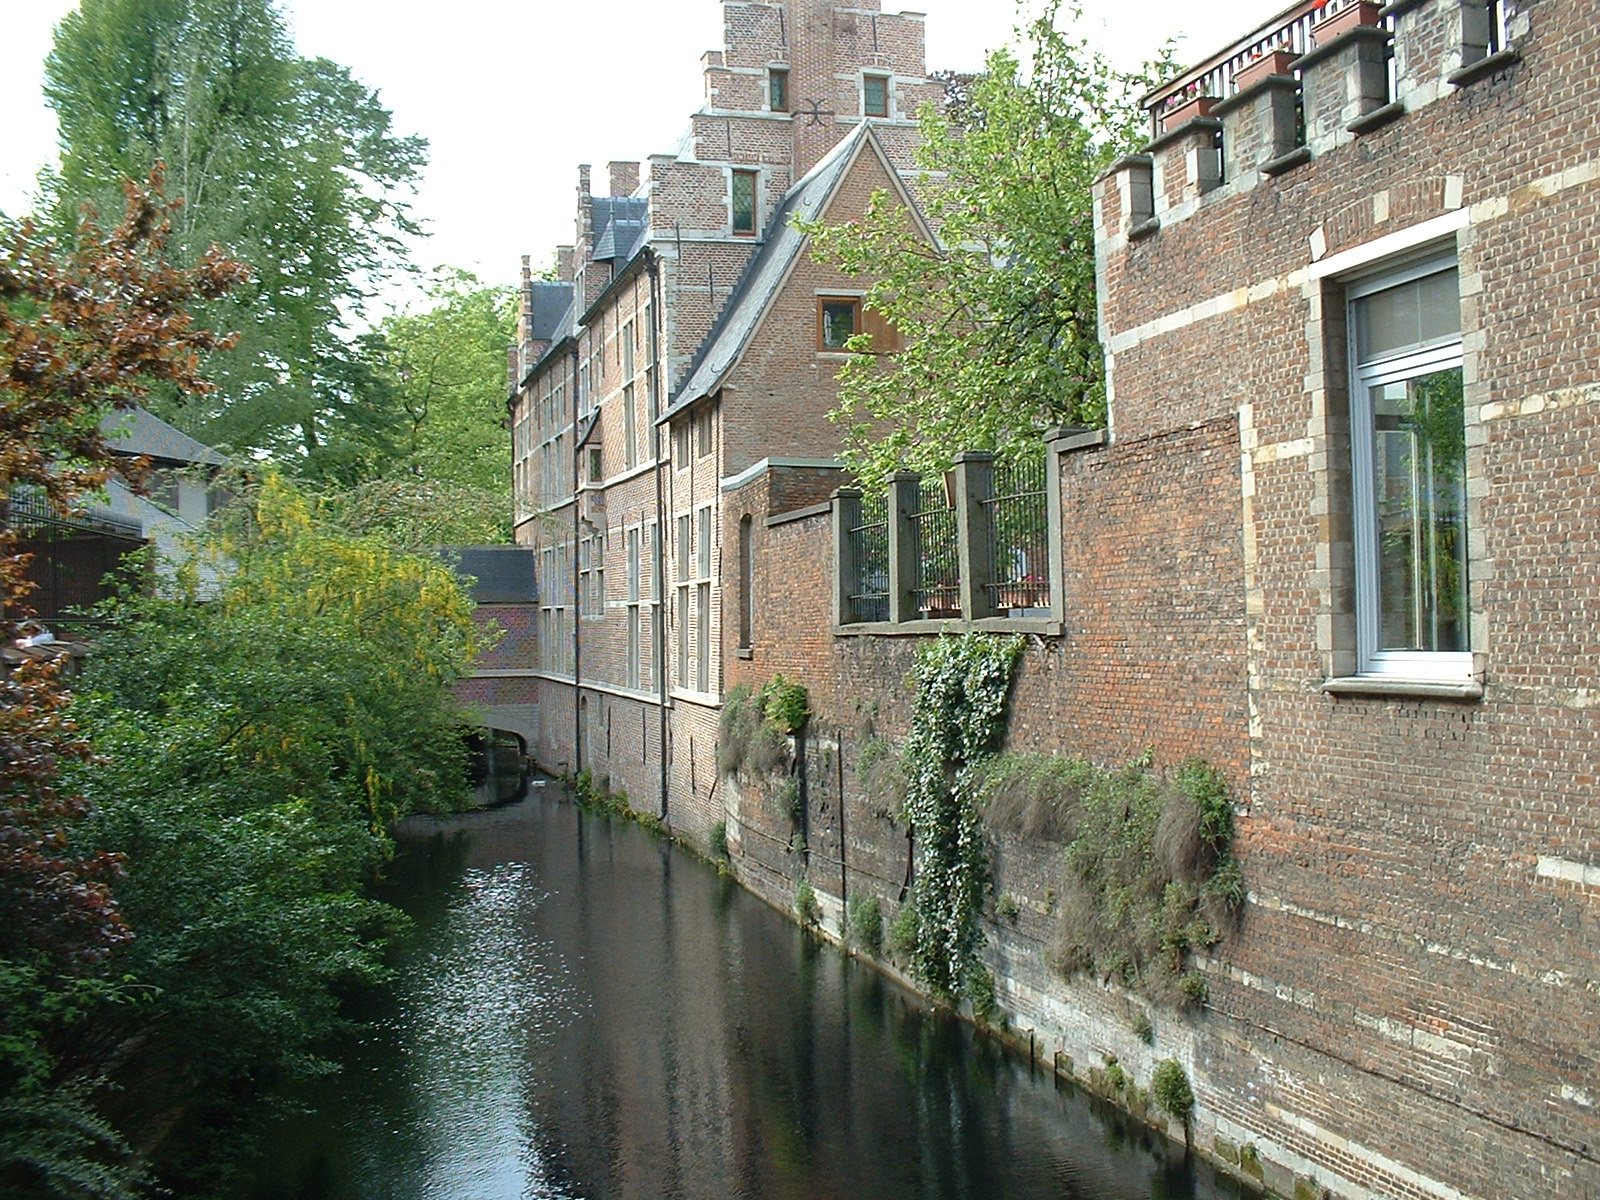 some pretty buildings by a river with windows